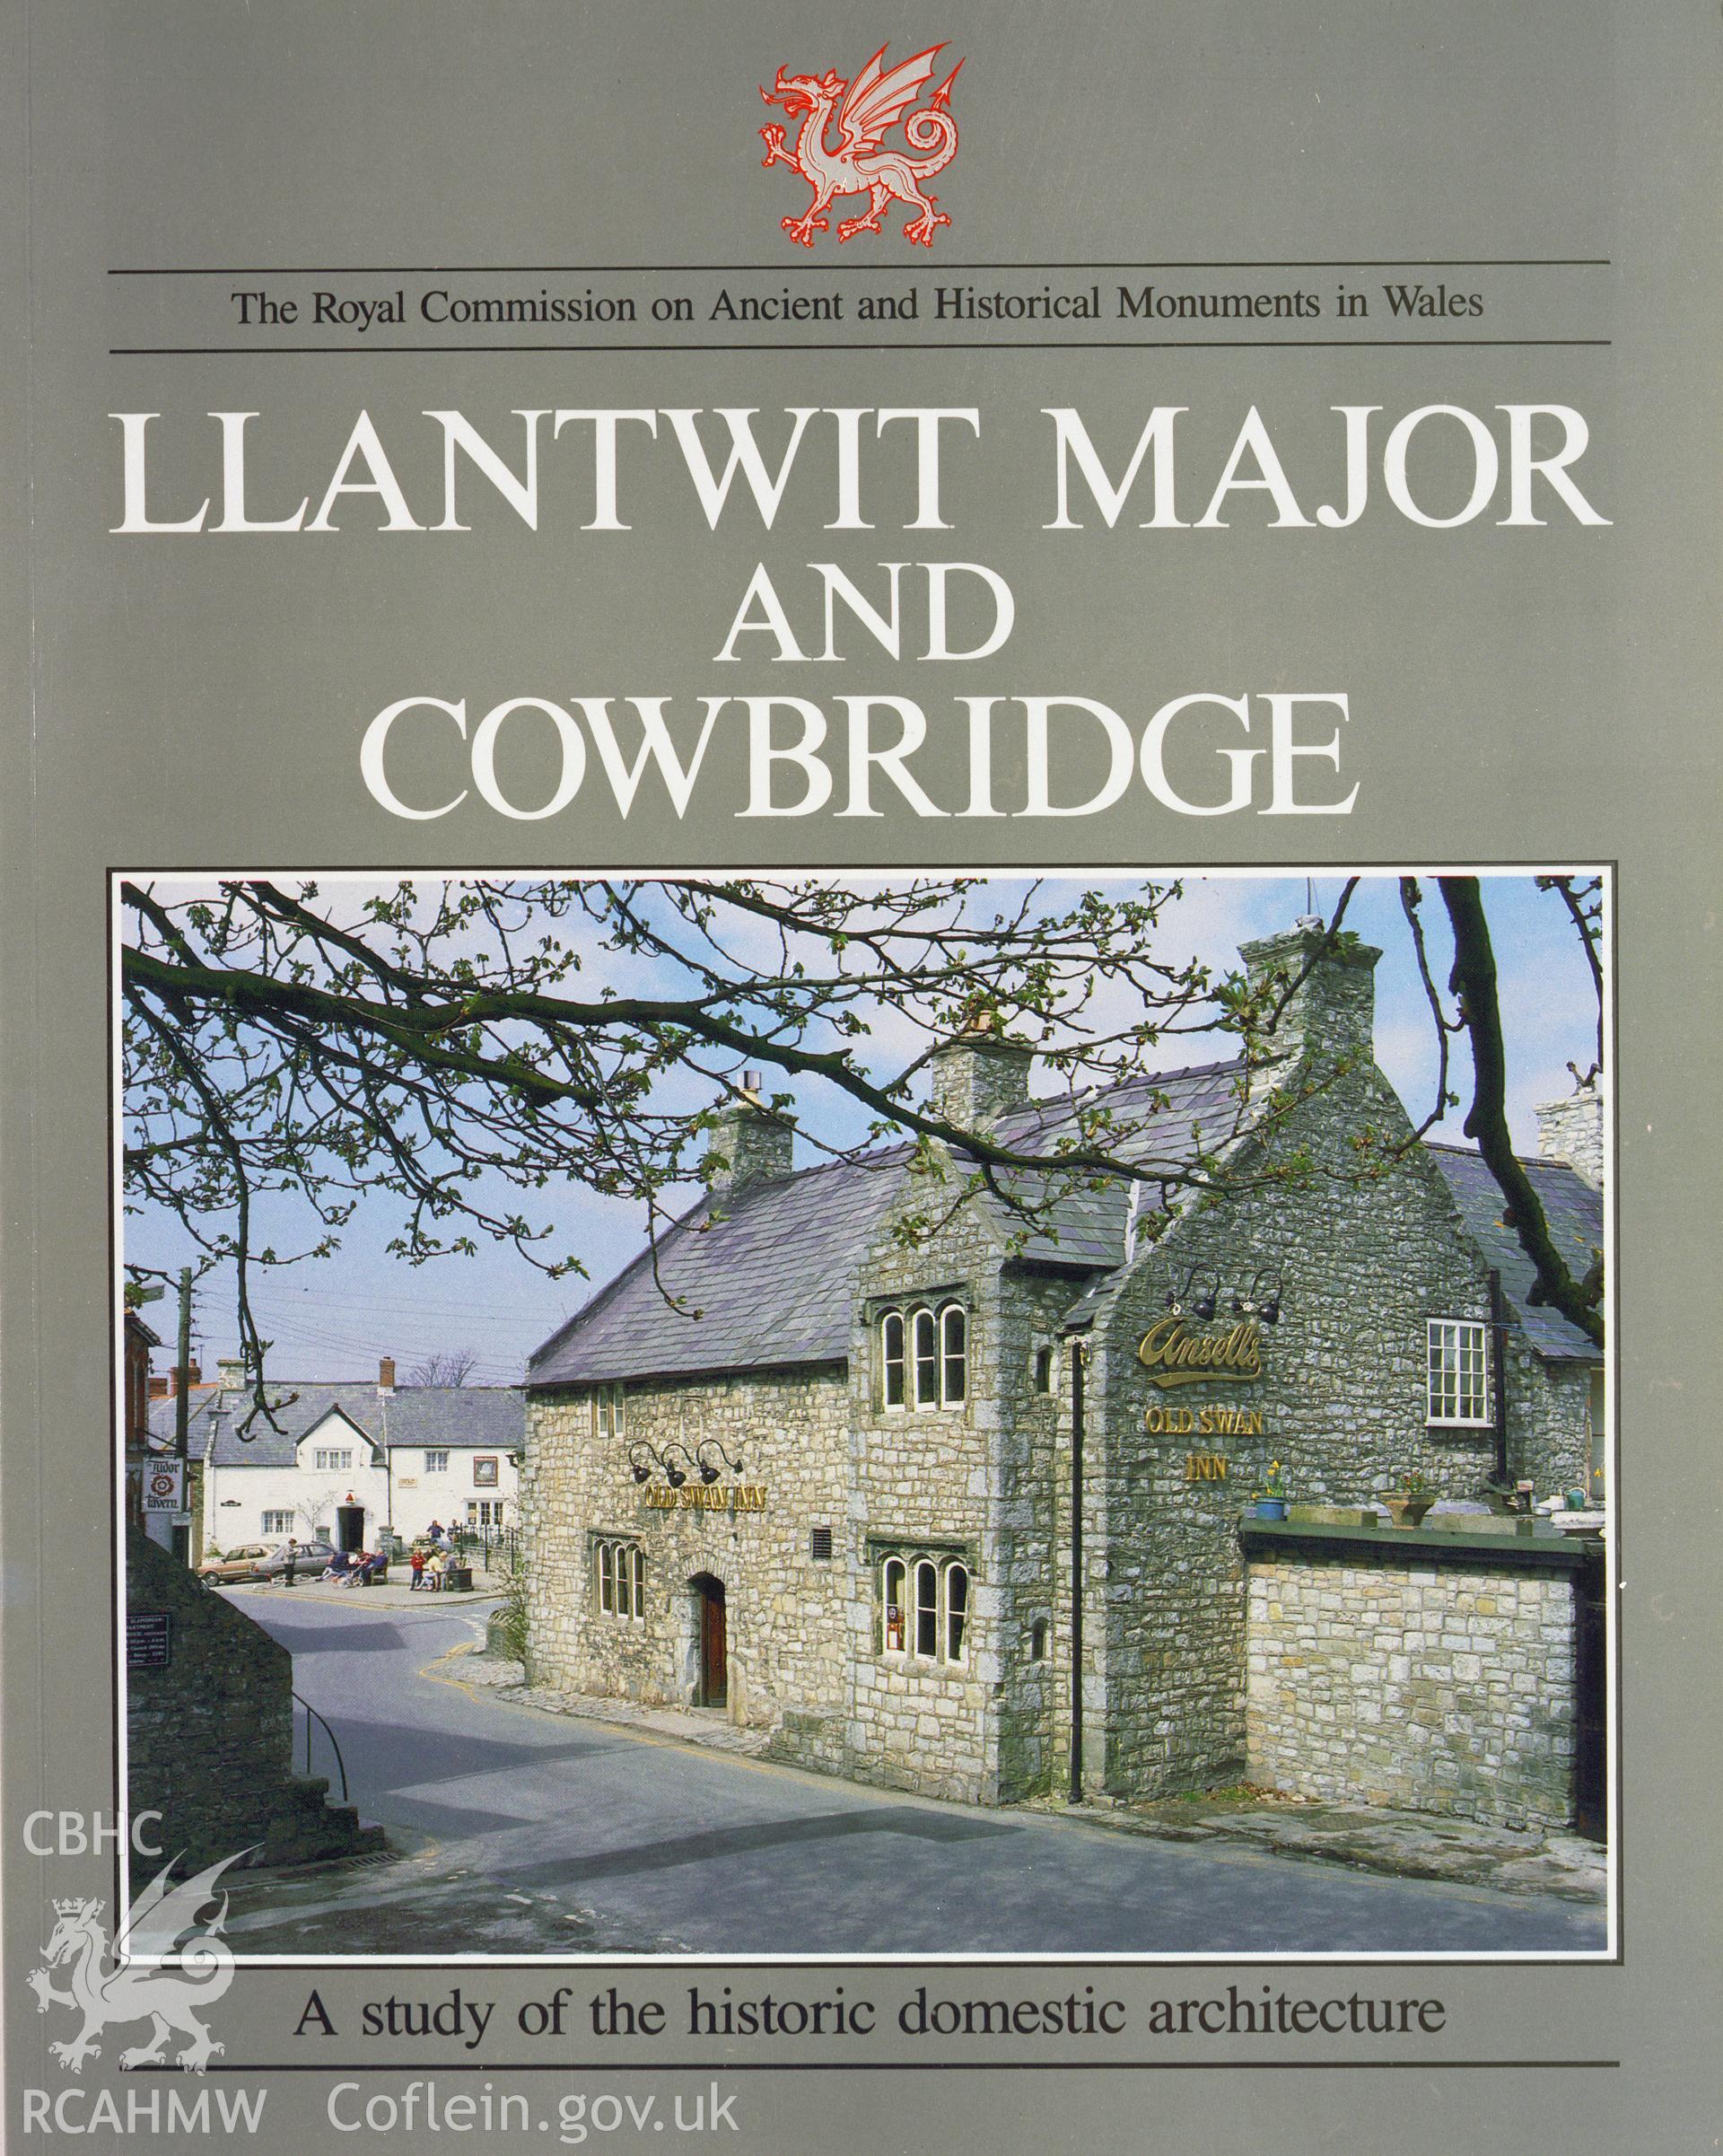 Colour transparency of the cover of the RCAHMW Publication of Llantwit Major and Cowbridge, A Study of the Historic Domestic Architecture.